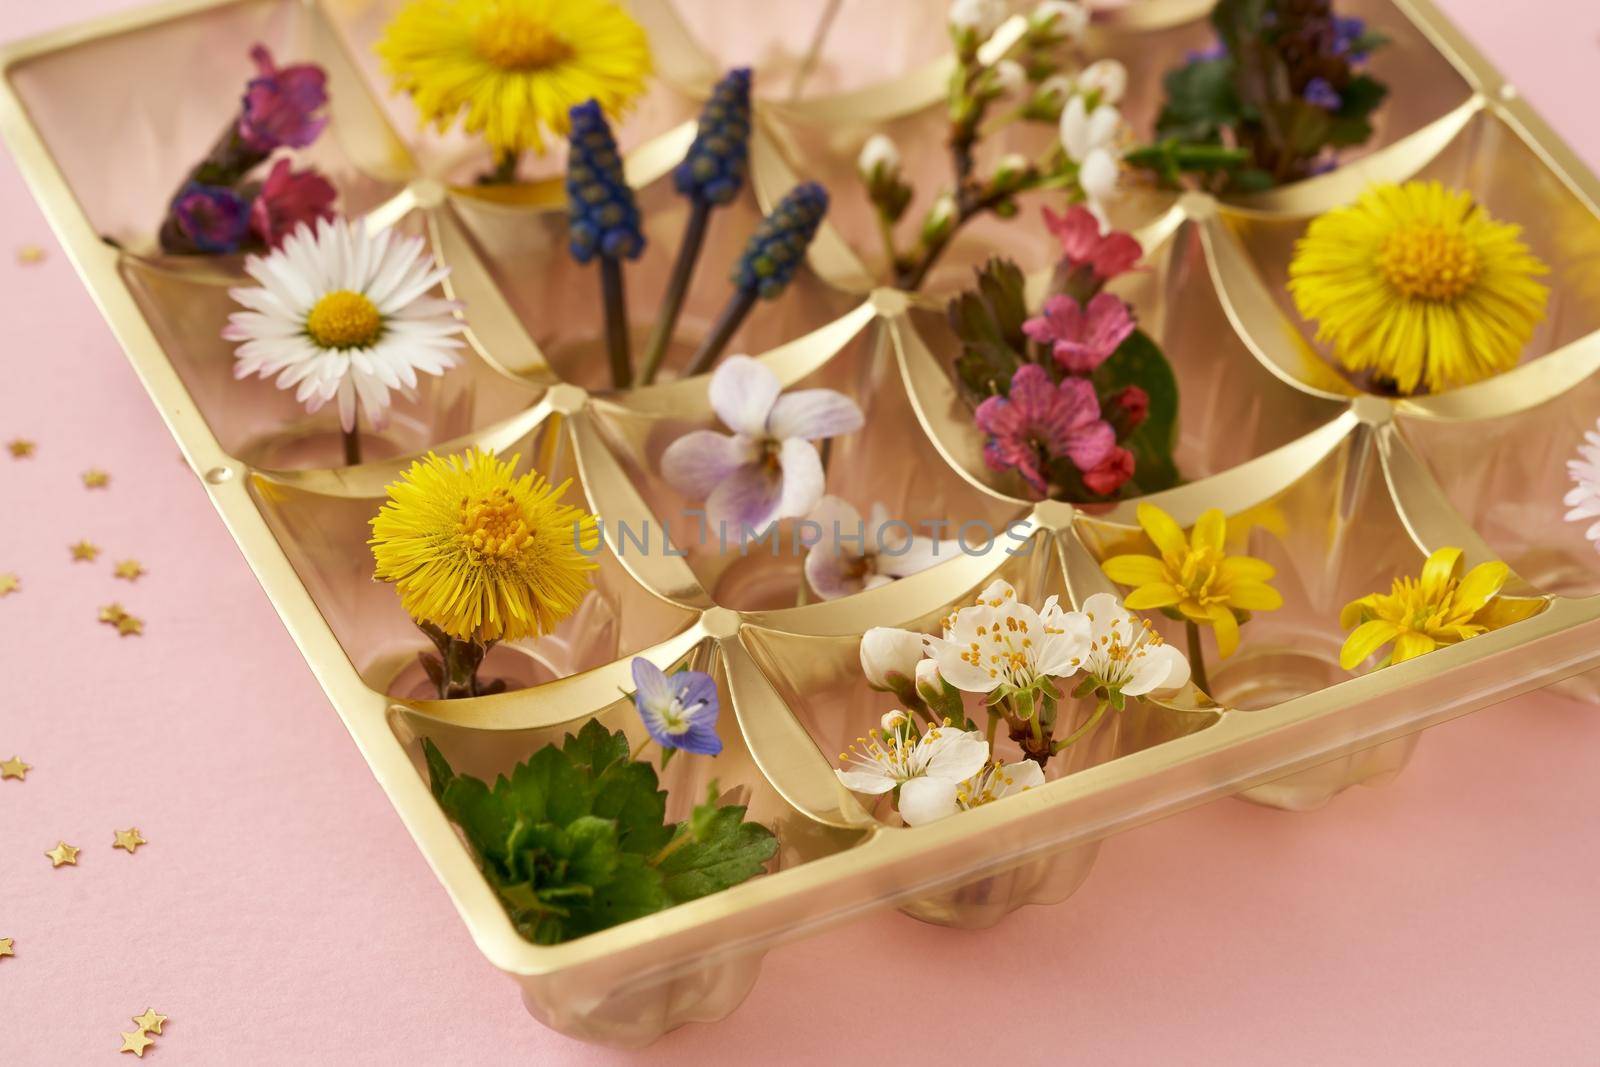 Empty box of chocolates filled with a selection of wild plants growing in spring - coltsfoot, lungwort, violet and other